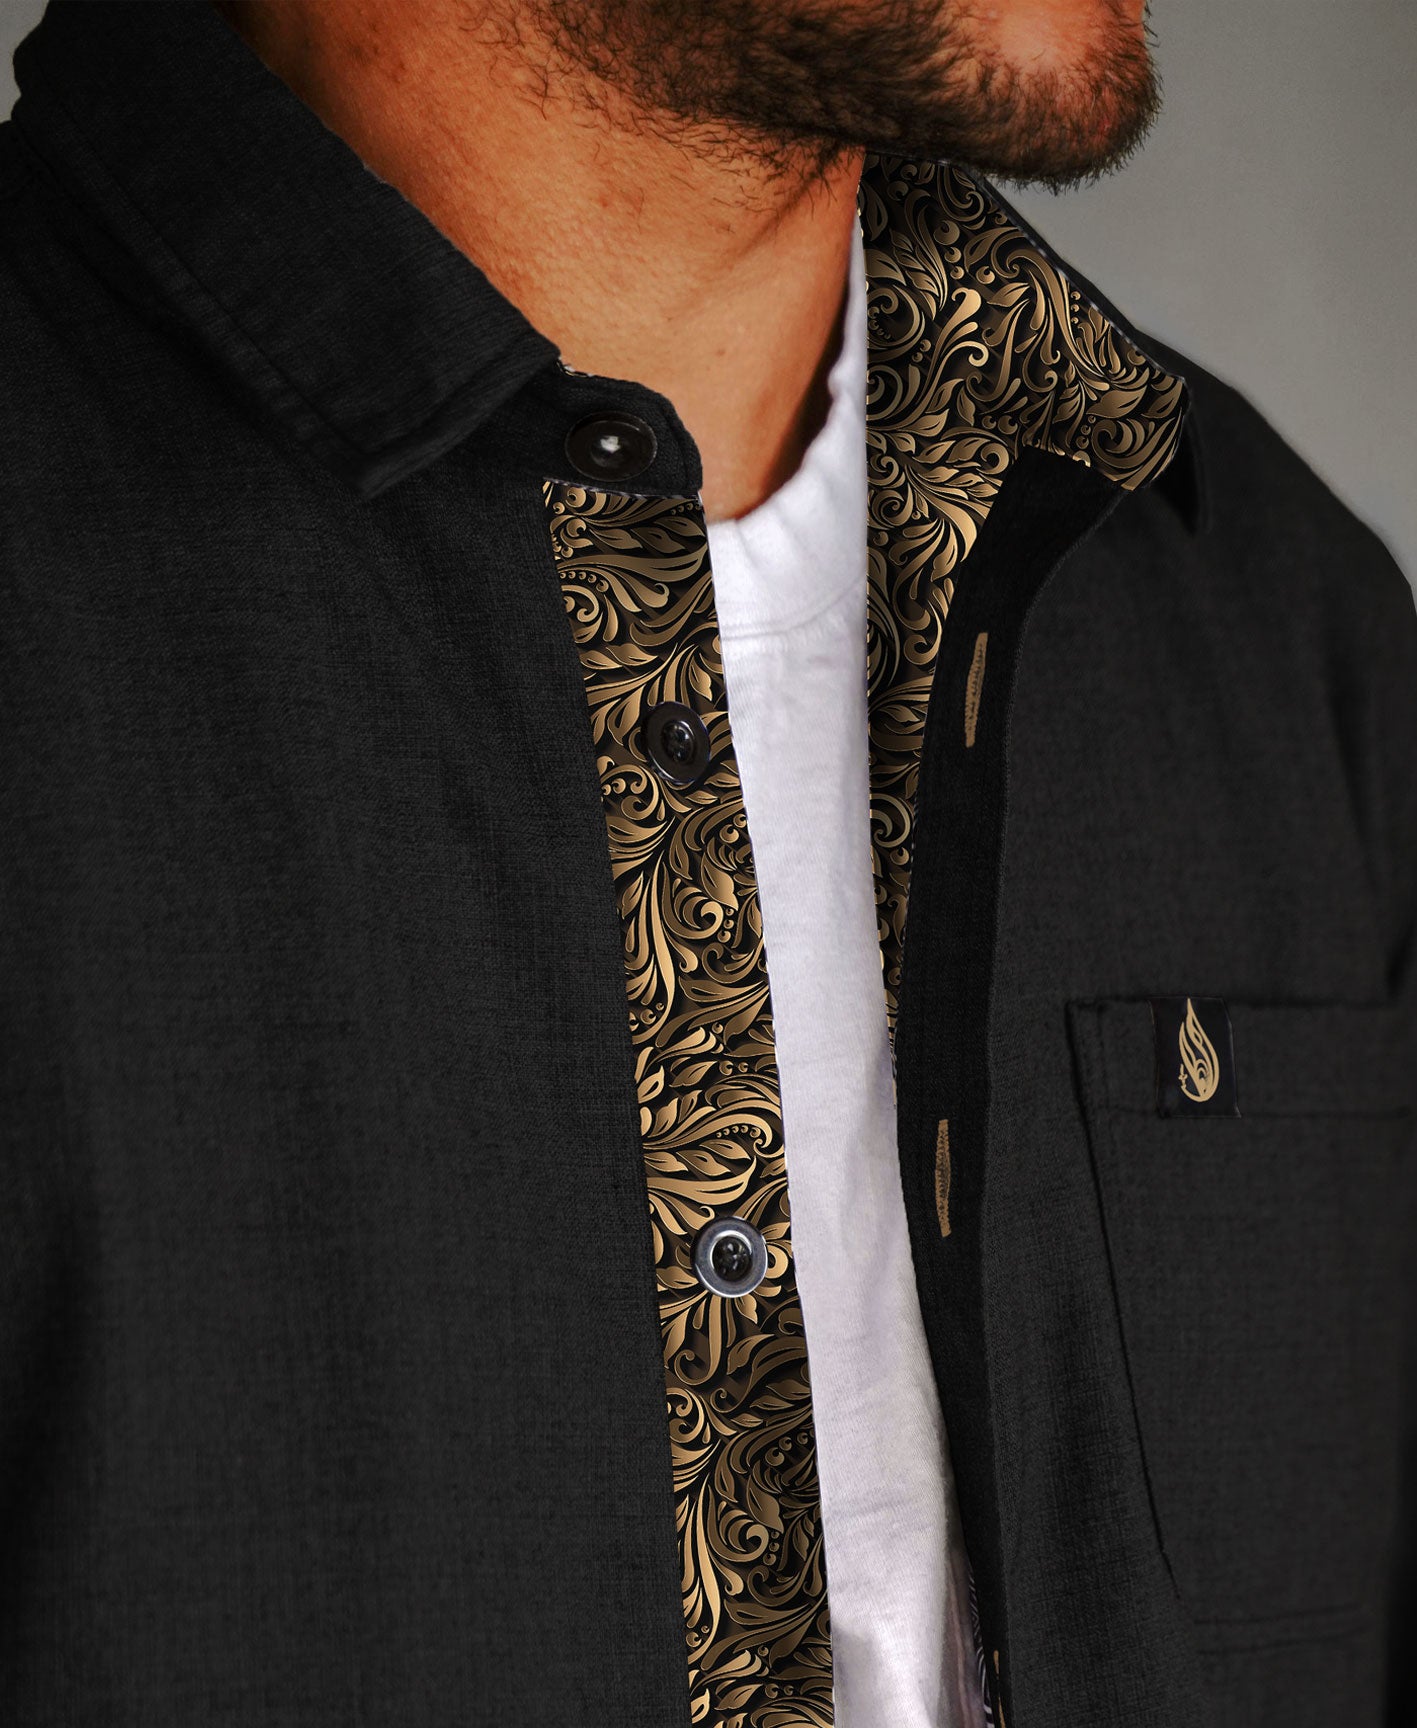 Golden Thread Lined Button Down Shirt by Threyda - Exclusive Presale SHIPS APRIL